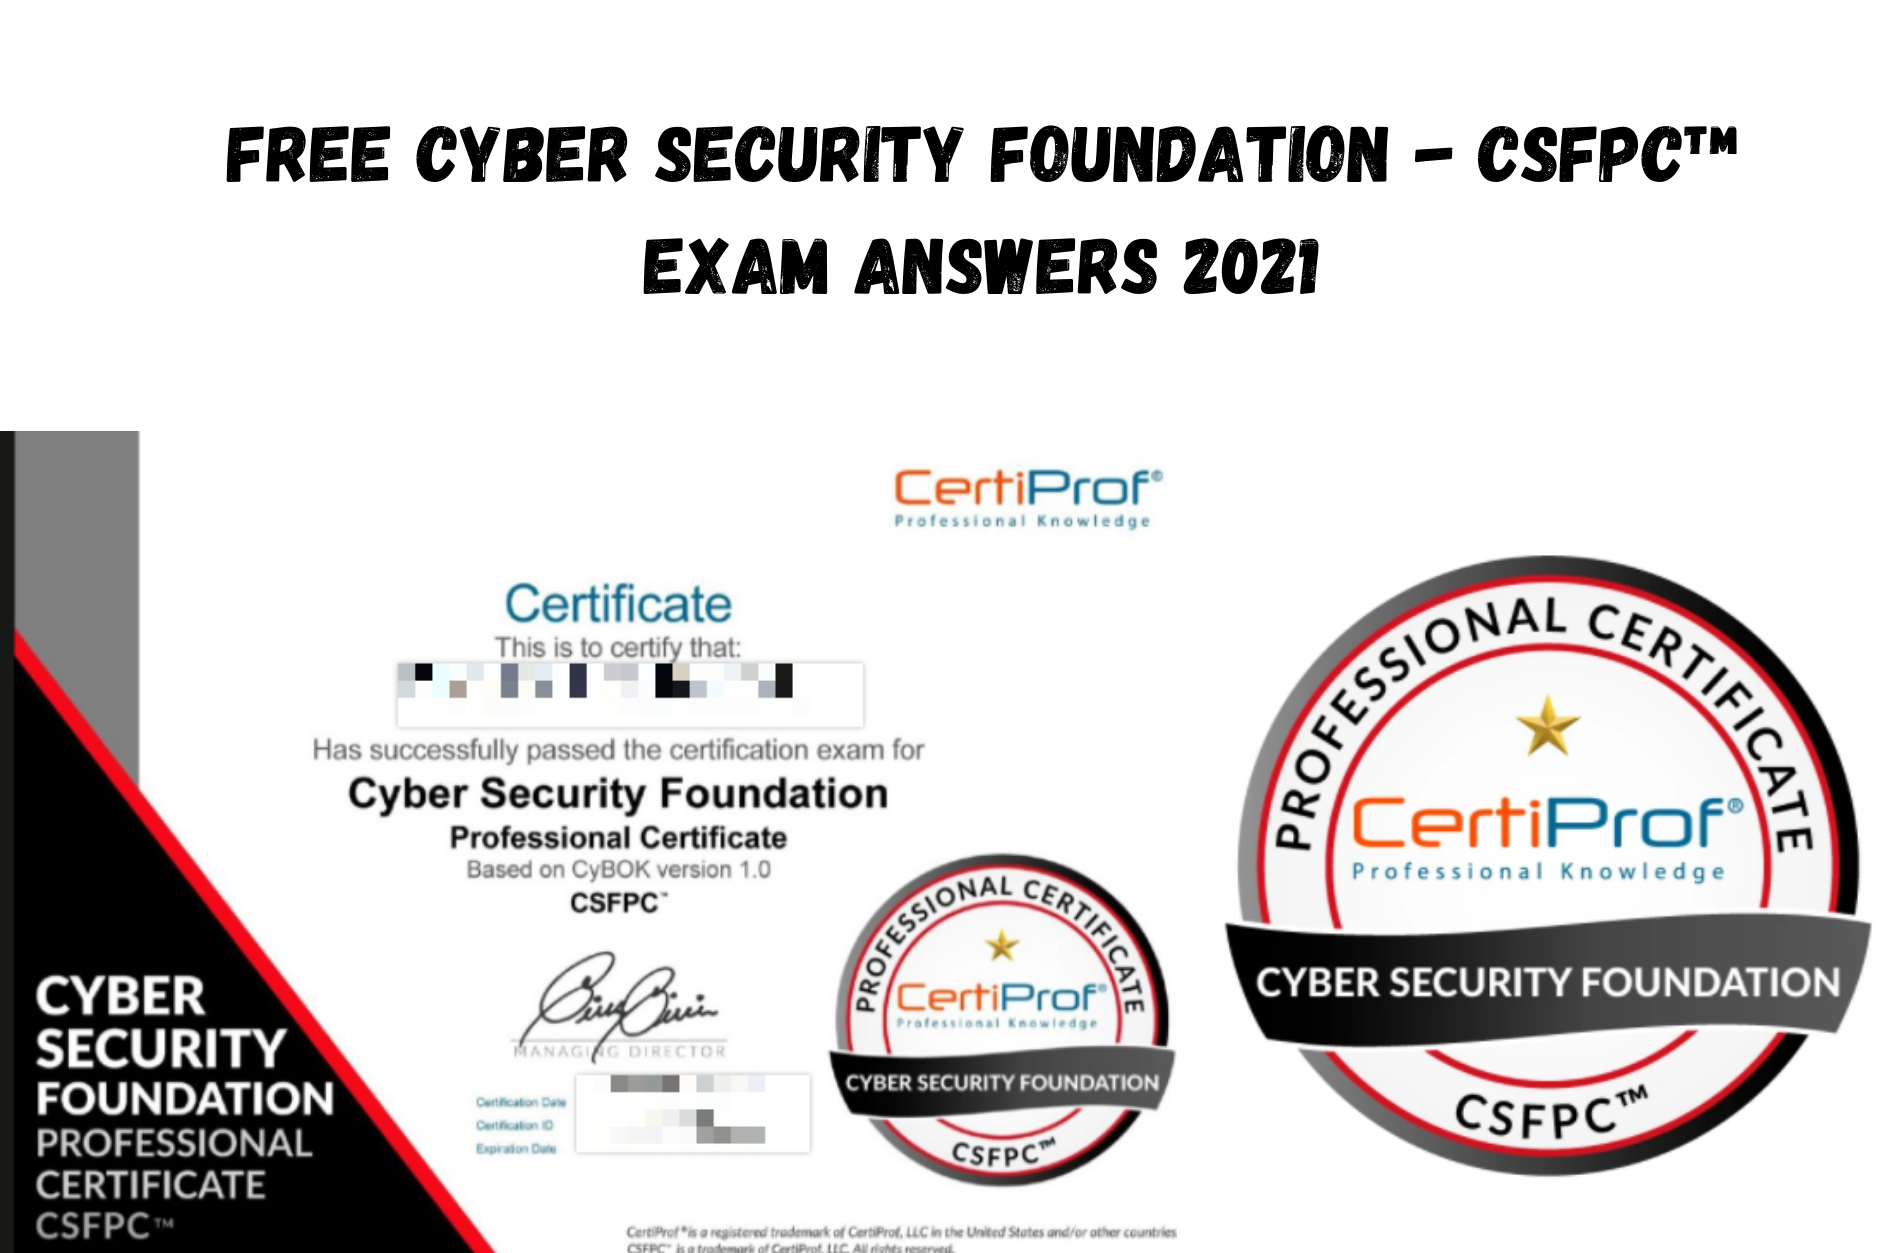 Free Cyber Security Foundation - CSFPC™ Exam Answers 2021